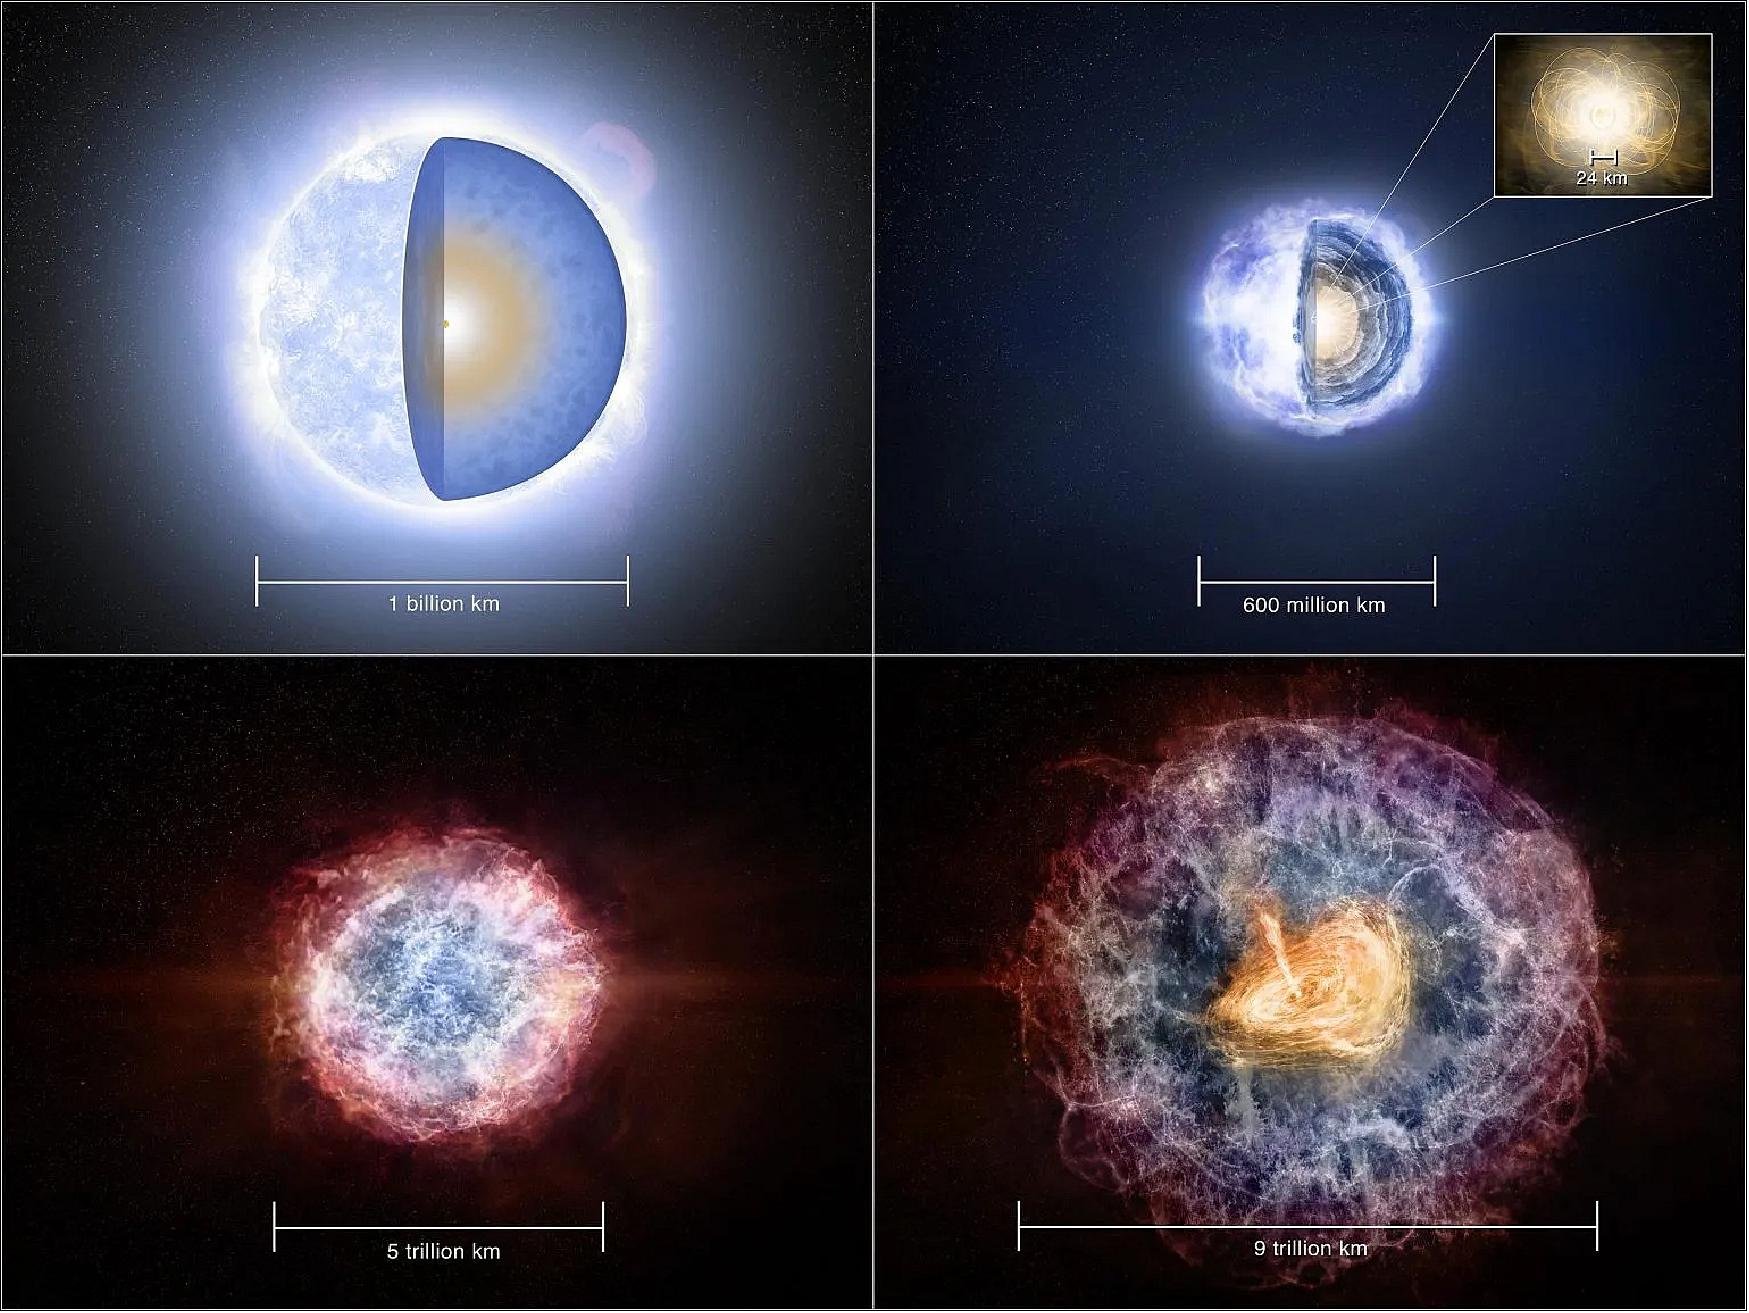 Figure 9: Top Left: A giant blue star, much more massive than our Sun, has consumed, through nuclear fusion at its center, all its hydrogen, helium, and heavier elements up to iron. It now has a small iron core (red dot) at its center. Unlike the earlier stages of fusion, the fusion of iron atoms absorbs, rather than releases, energy. The fusion-released energy that has held up the star against its own weight now is gone, and the star will quickly collapse, triggering a supernova explosion. Top Right: The collapse has begun, producing a superdense neutron star with a strong magnetic field at its center (inset). The neutron star, though containing about 1.5 times the mass of the Sun, is only about the size of Manhattan. Bottom Left: The supernova explosion has ejected a fast-moving shell of debris outward into interstellar space. At this stage, the debris shell is dense enough to shroud from view any radio waves coming from the region of the neutron star. Bottom Right: As the shell of explosion debris expands over a few decades, it becomes less dense and eventually becomes thin enough that radio waves from inside can escape. This allowed observations by the VLA Sky Survey to detect bright radio emission created as the rapidly spinning neutron star’s powerful magnetic field sweeps through the surrounding space, accelerating charged particles. This phenomenon is called a pulsar wind nebula (image credit: Melissa Weiss, NRAO/AUI/NSF)